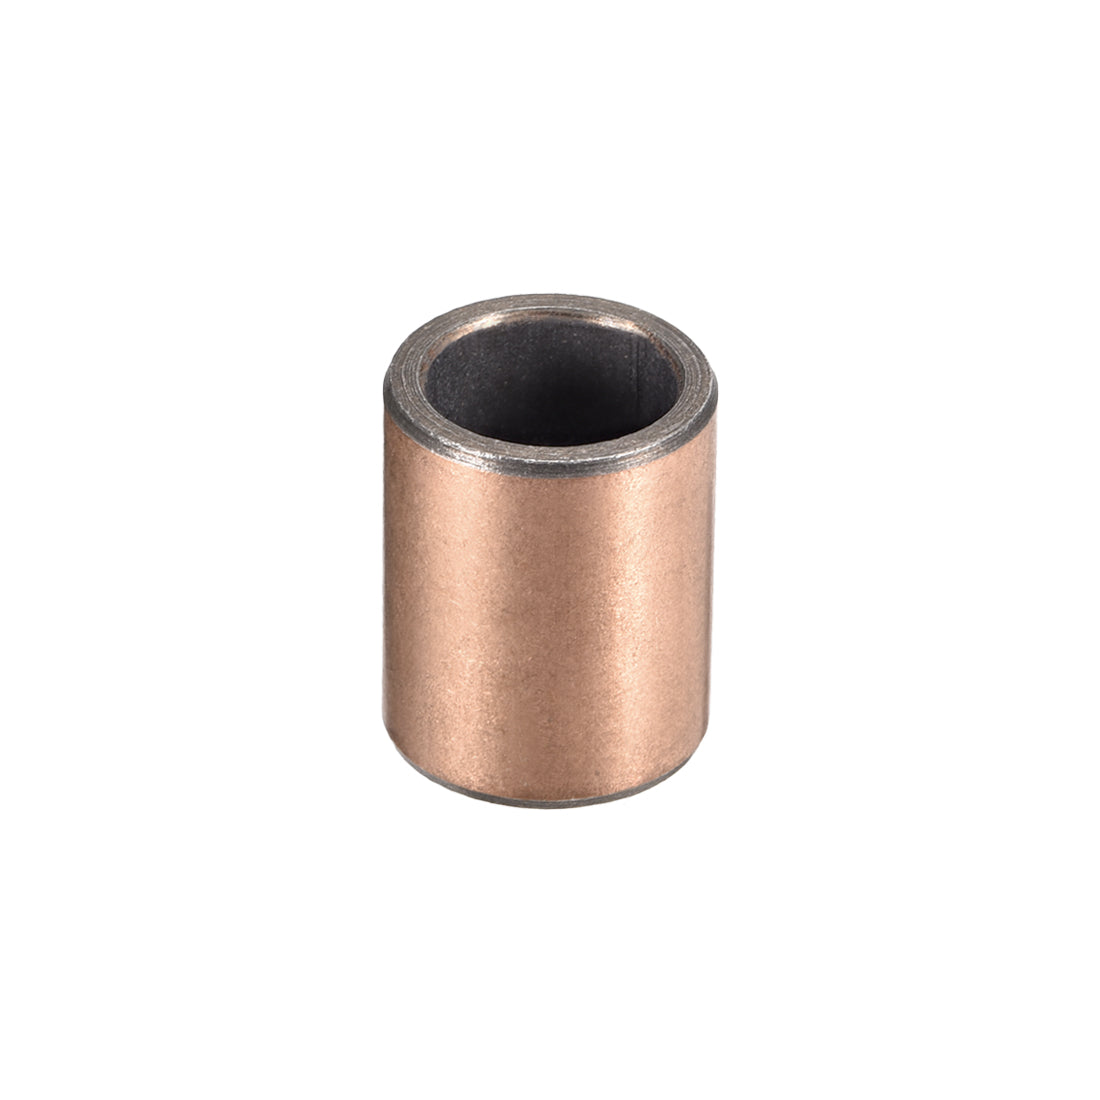 uxcell Uxcell Sleeve (Plain) Bearings 12mm Bore 16mm OD 20mm L Wrapped Oilless Bushings